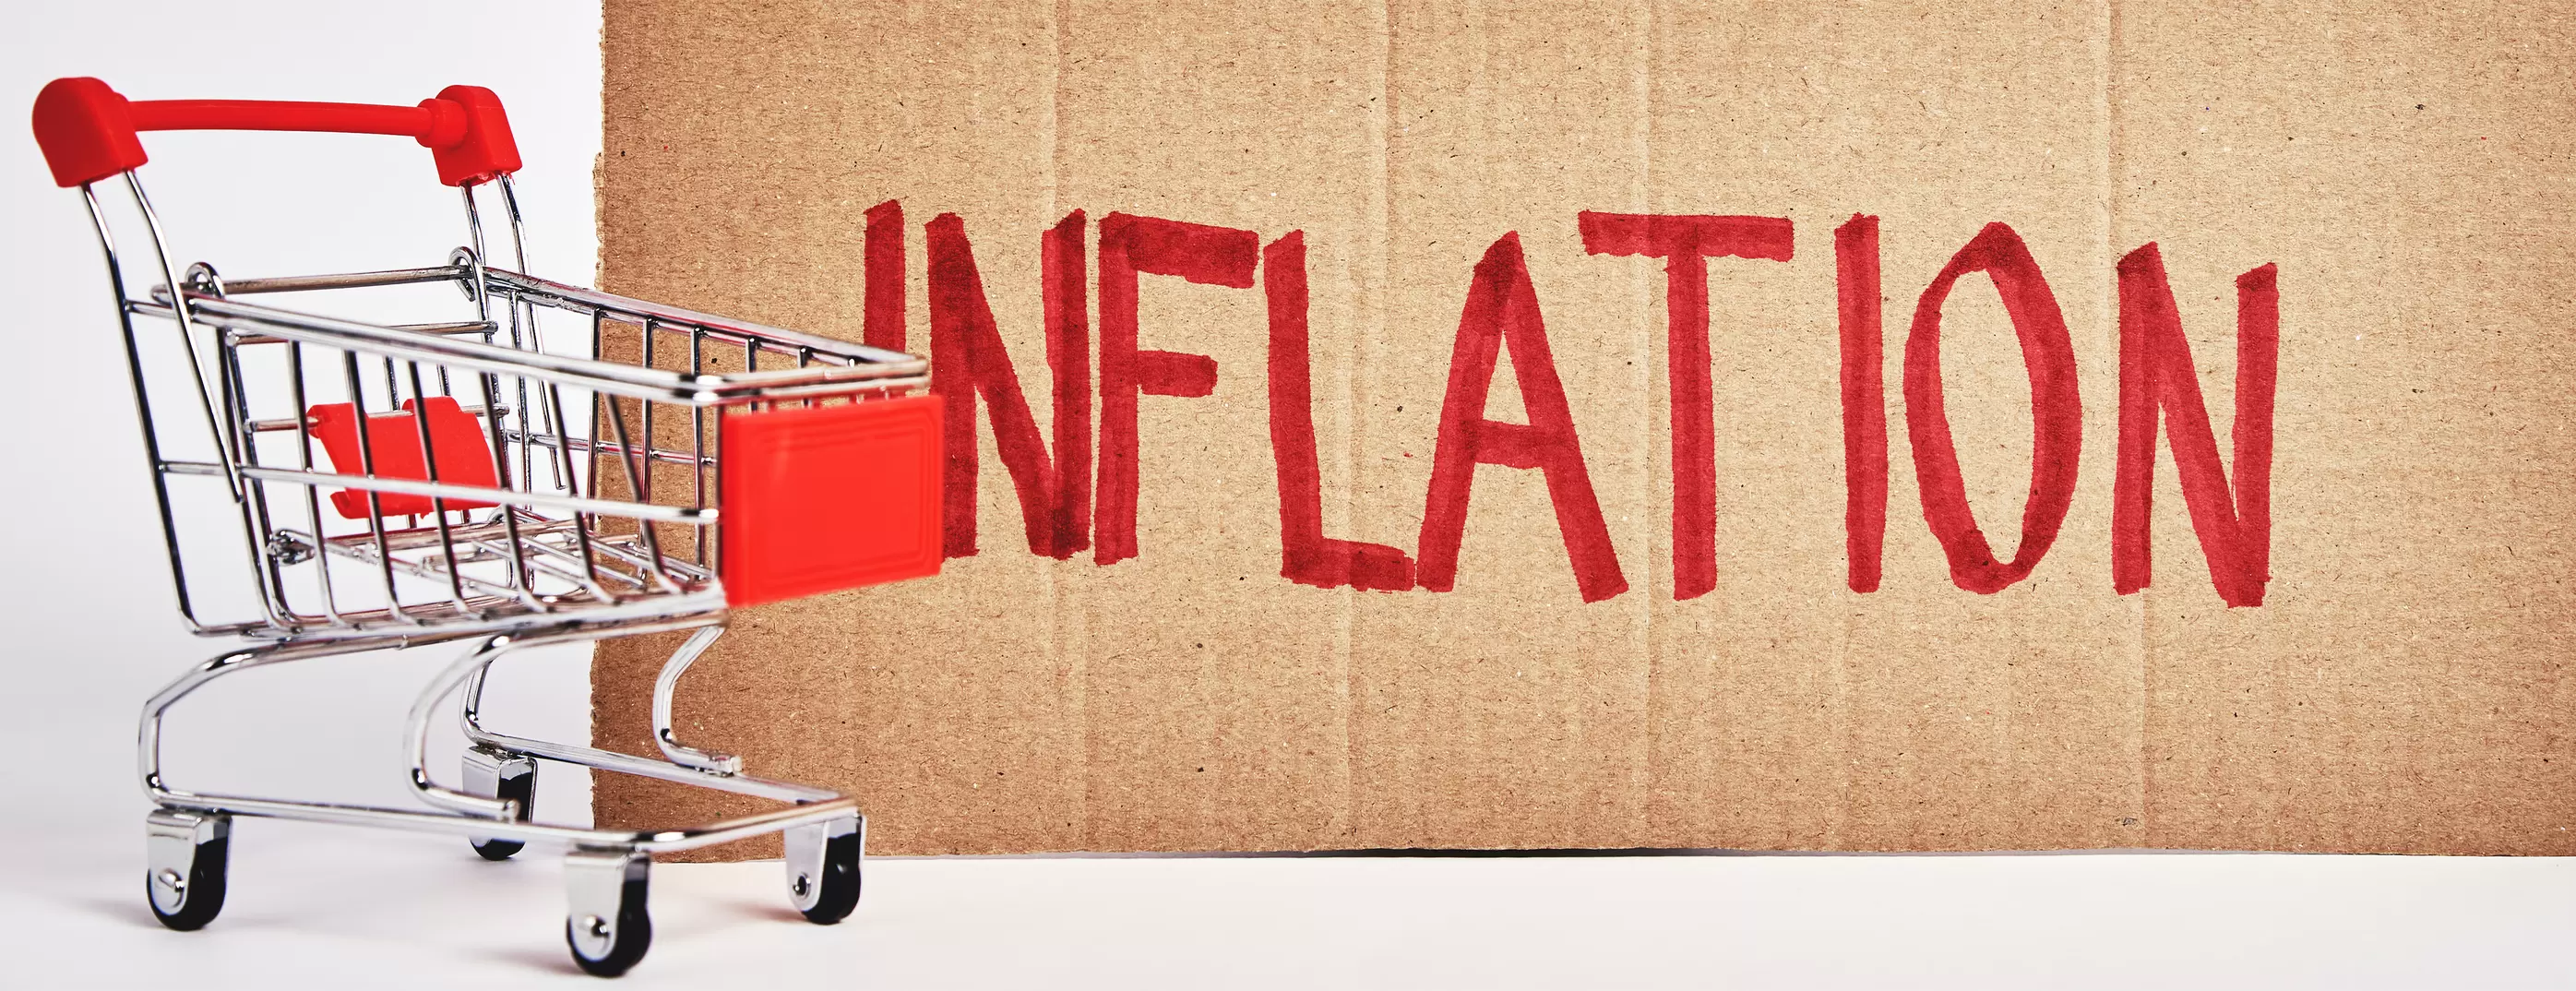 inflation article